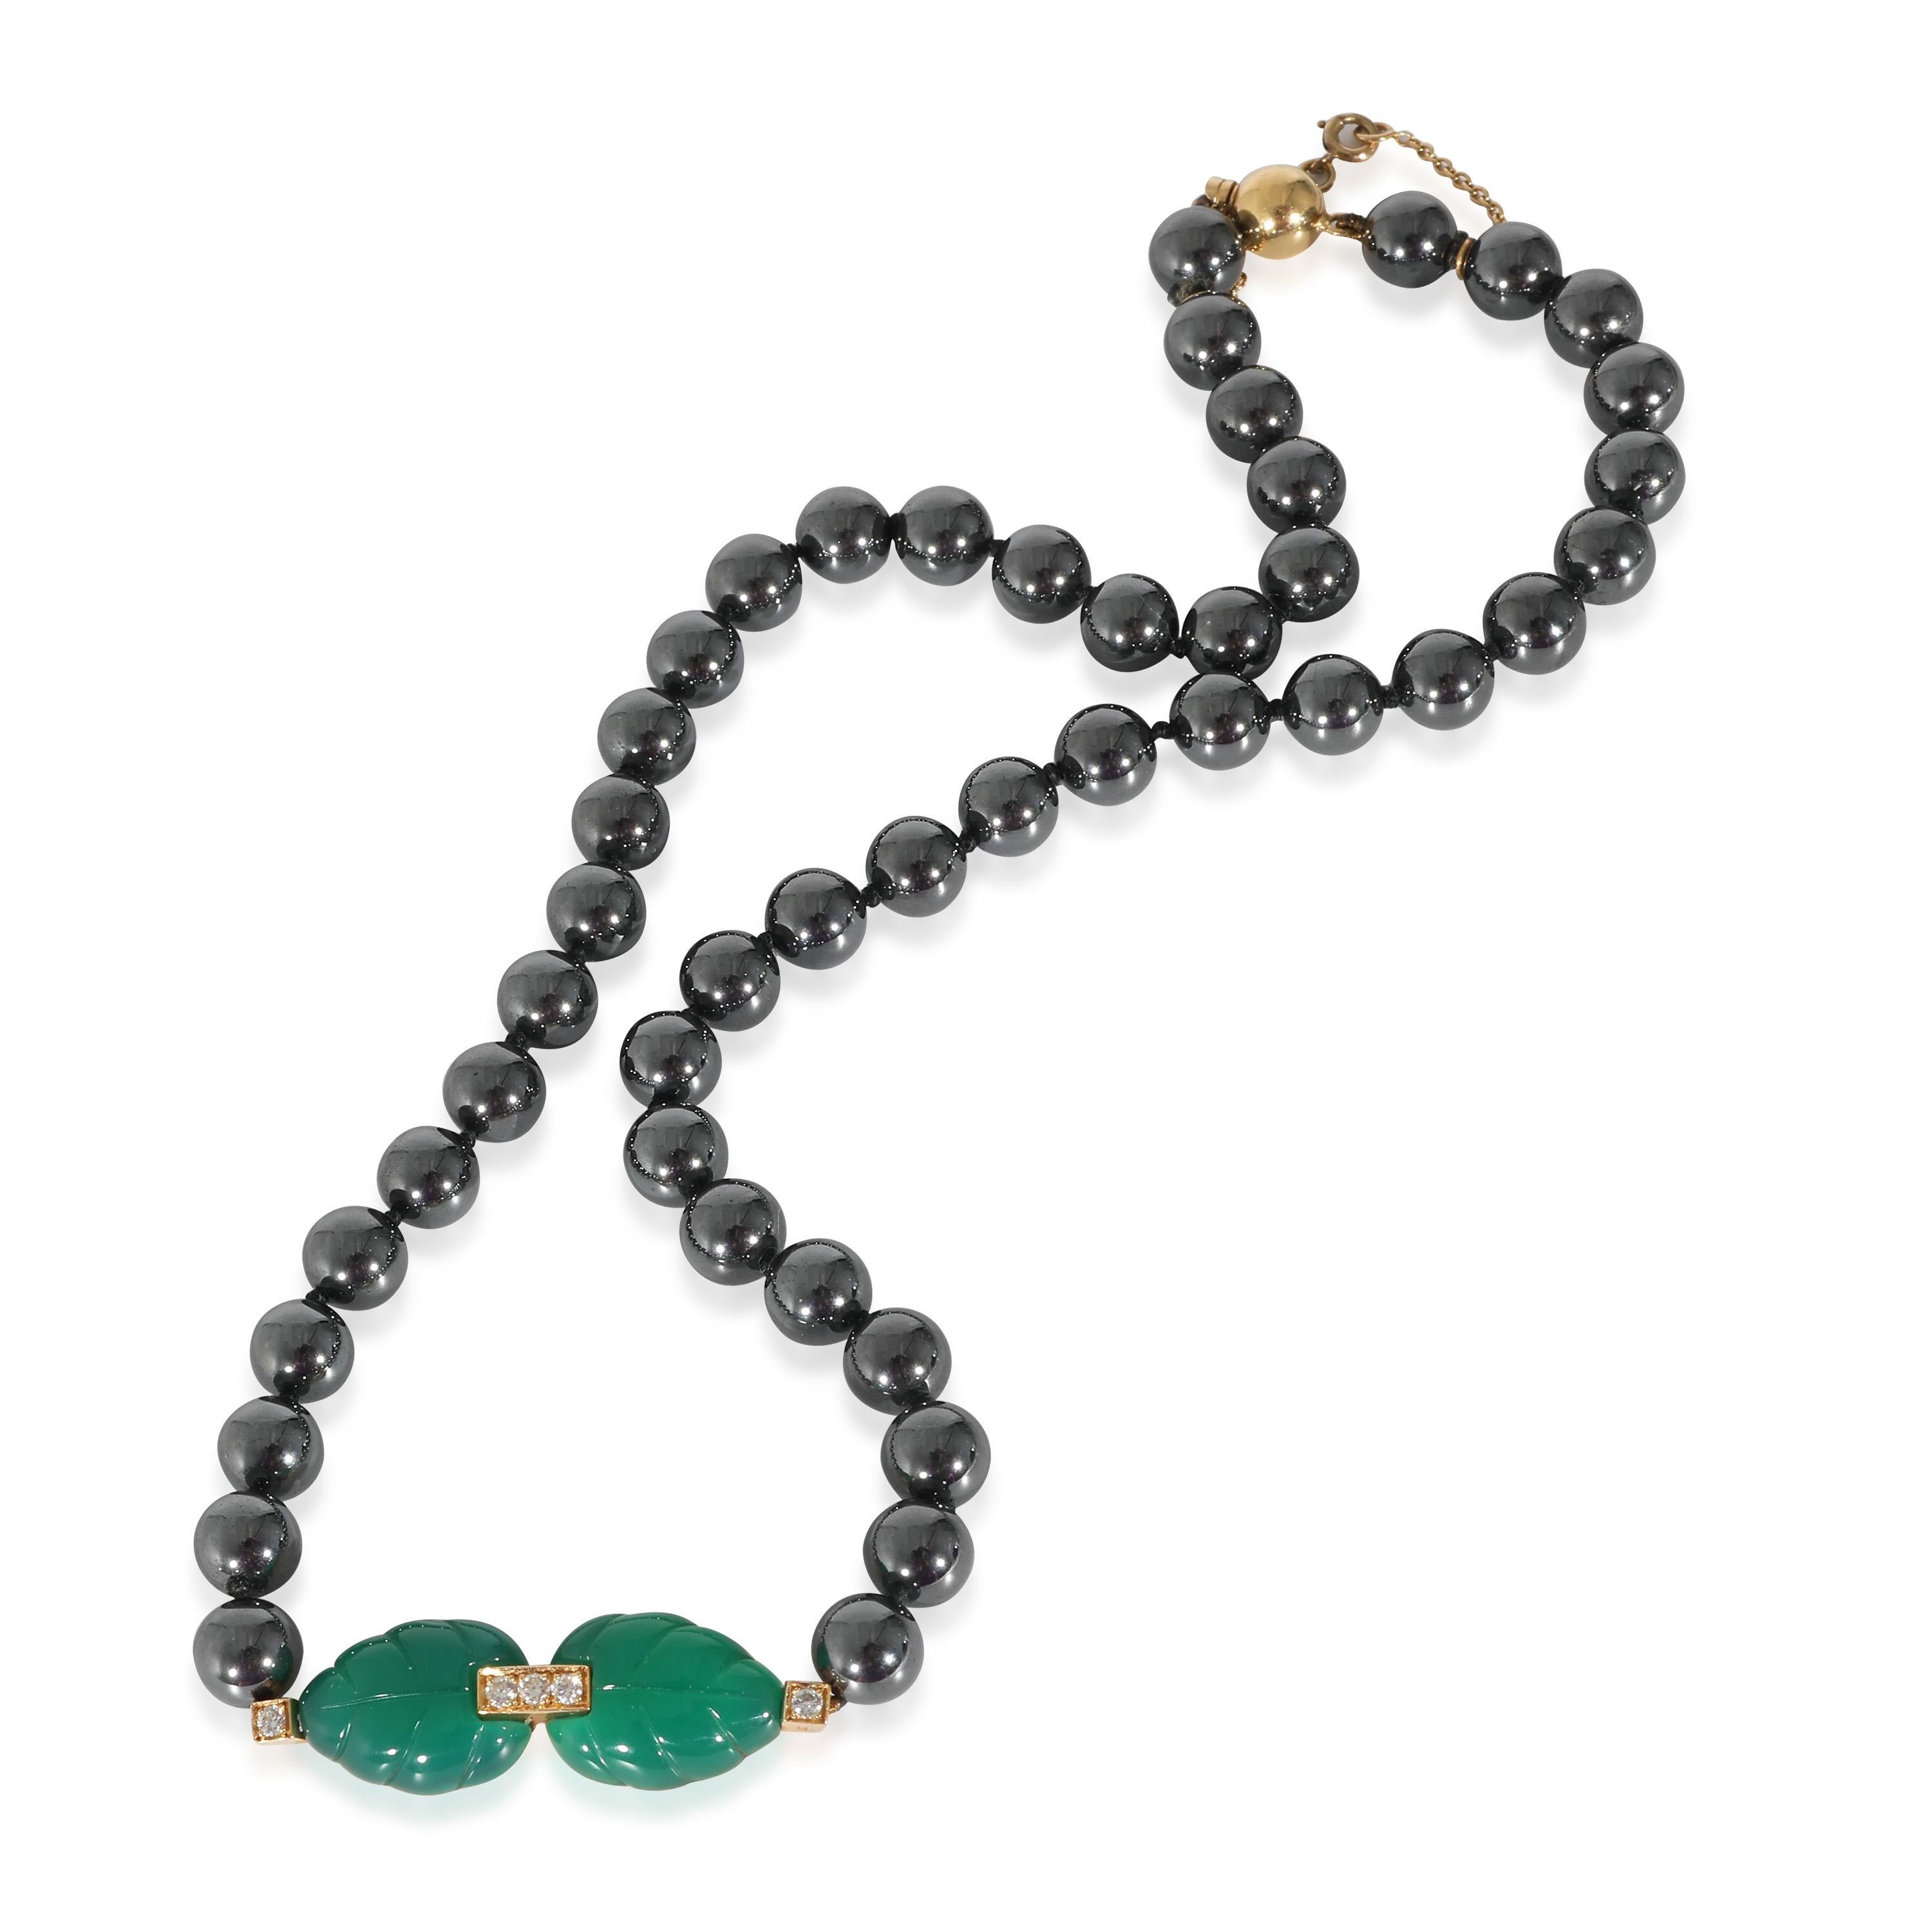 Cartier Patiala Hematite Beads & Diamond Necklace in 18K Yellow Gold 0.15 CTW

PRIMARY DETAILS
SKU: 135124
Listing Title: Cartier Patiala Hematite Beads & Diamond Necklace in 18K Yellow Gold 0.15 CTW
Condition Description: Retails for 9500 USD. In